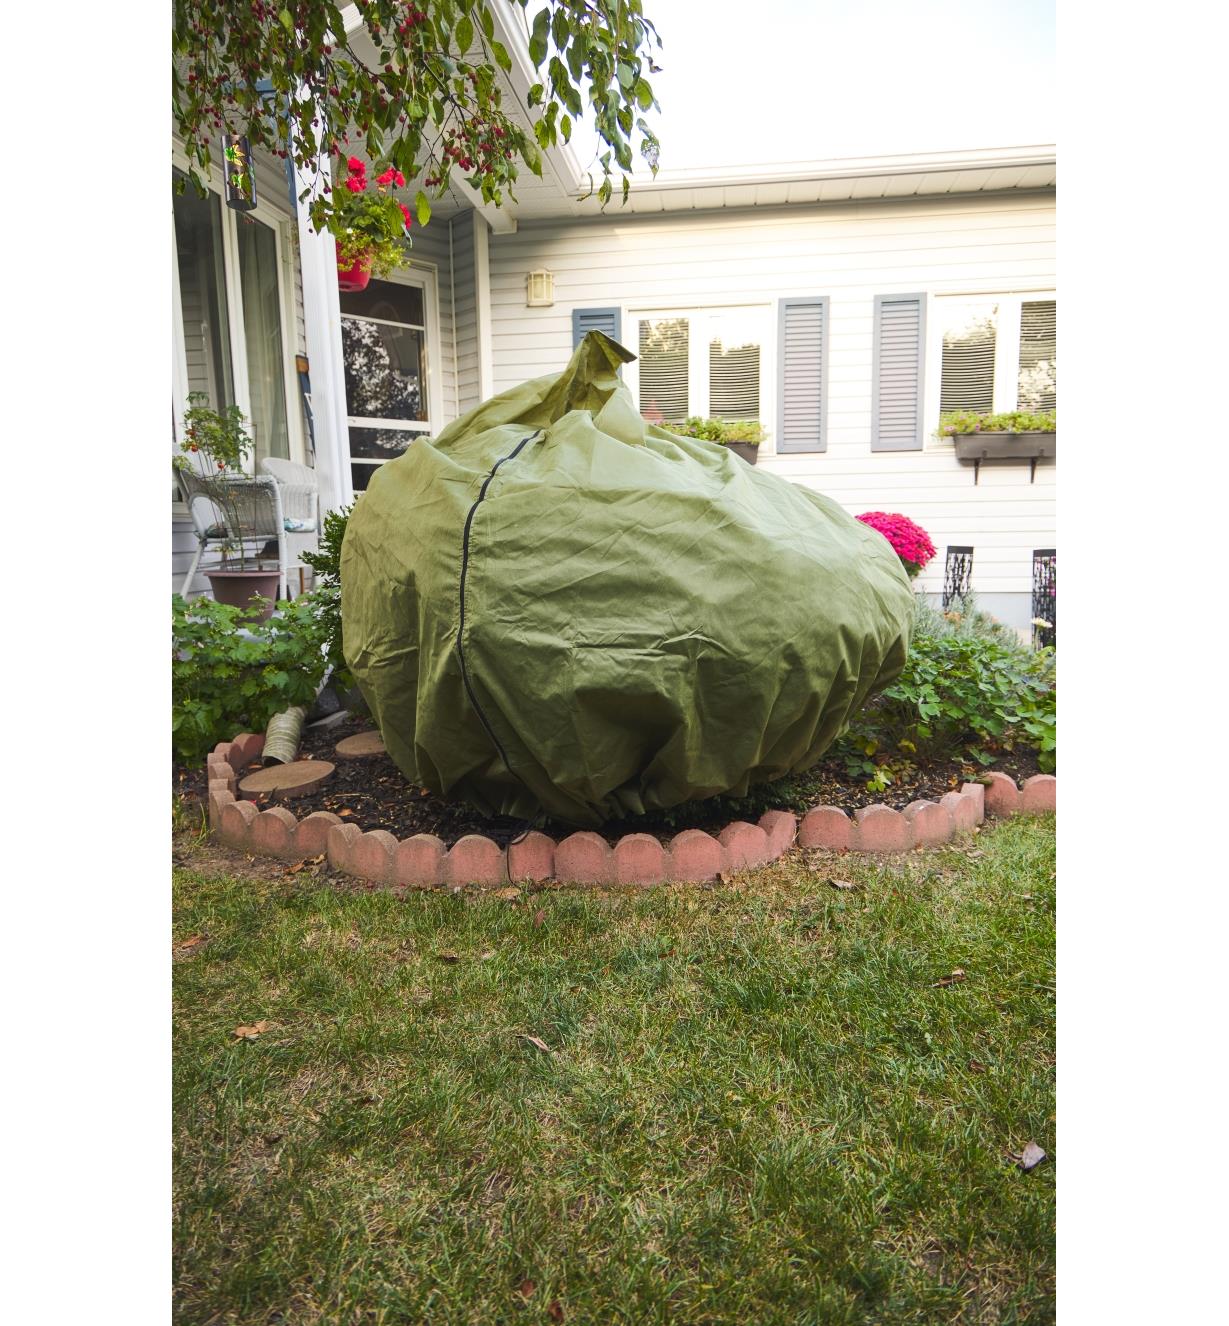 The Shrub & Potted Plant Protector zipped over a shrub in a garden